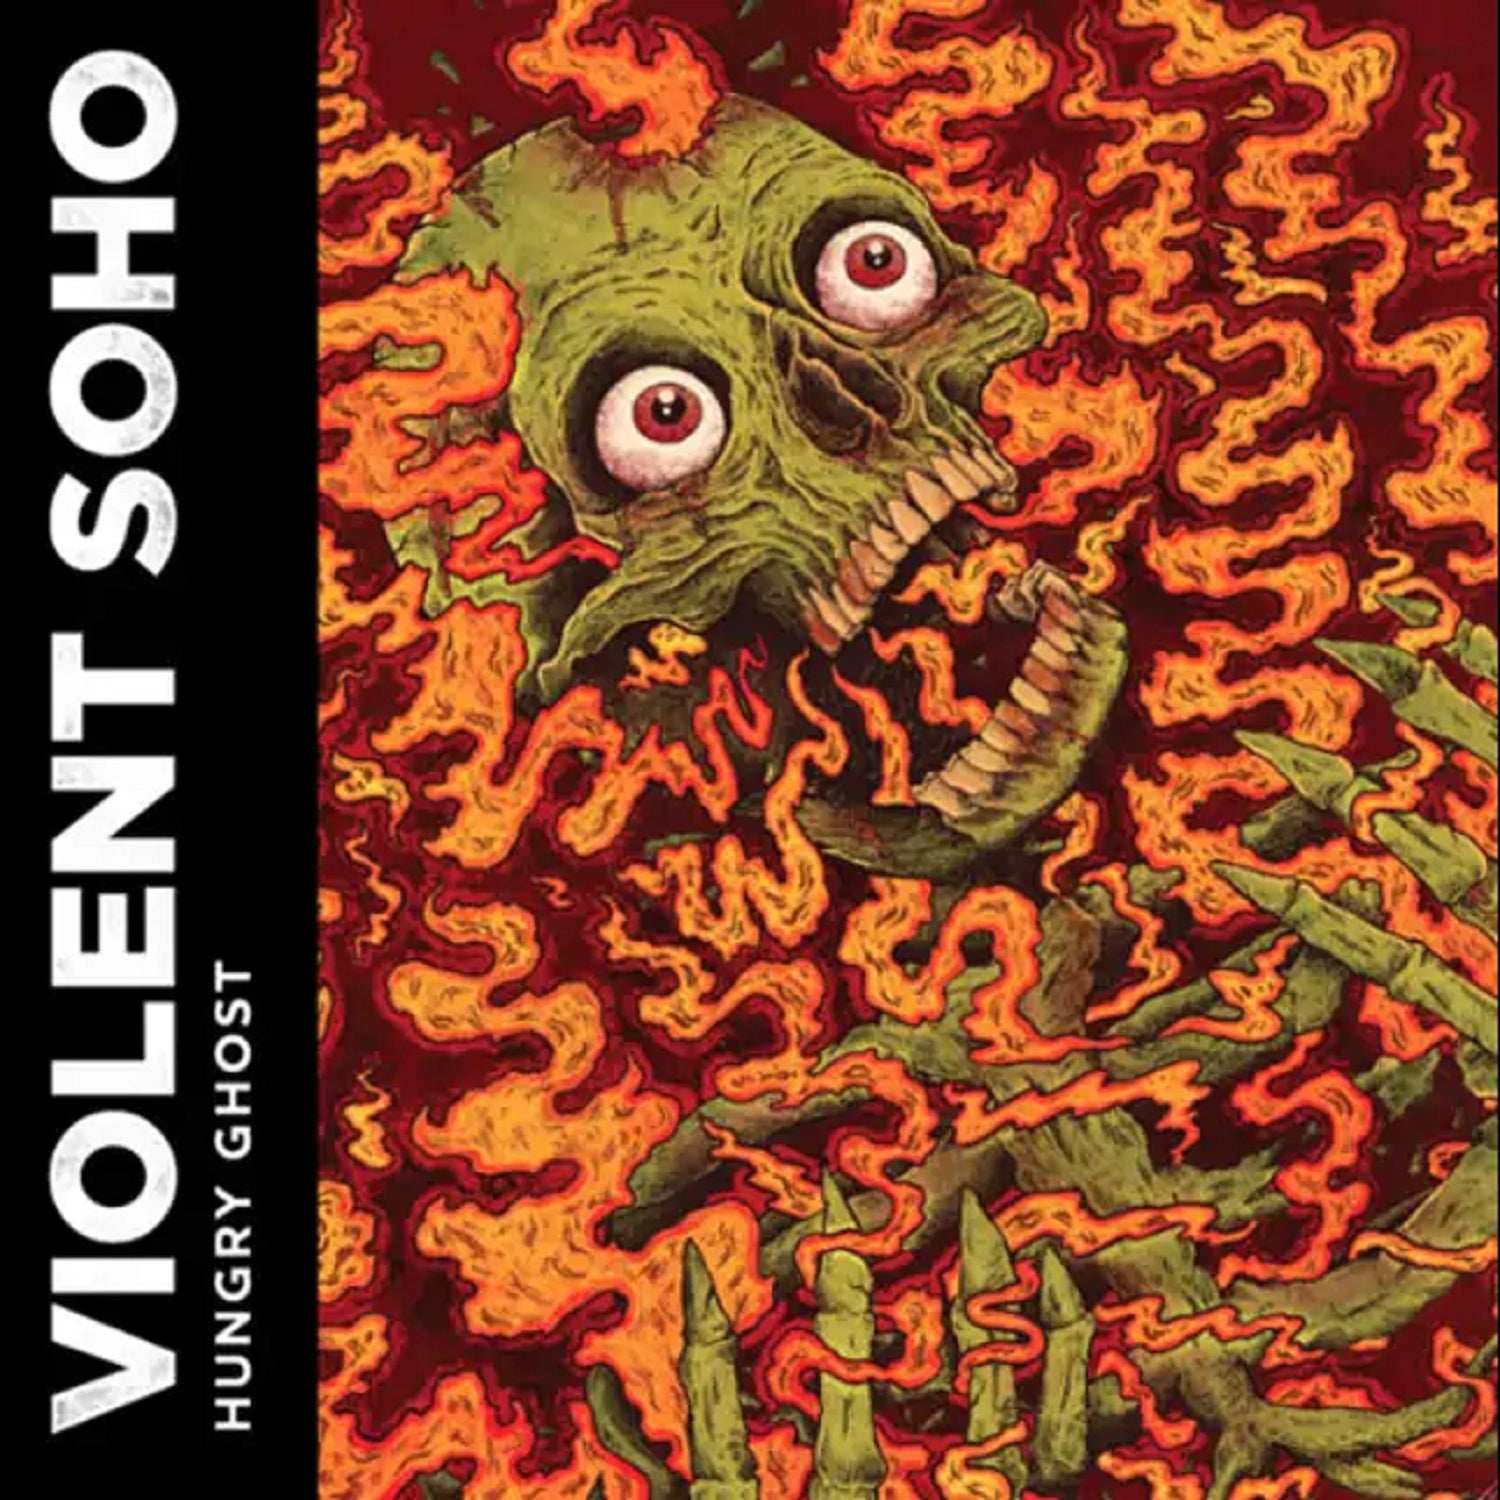 Violent Soho - Hungry Ghost - BROKEN 8 RECORDS